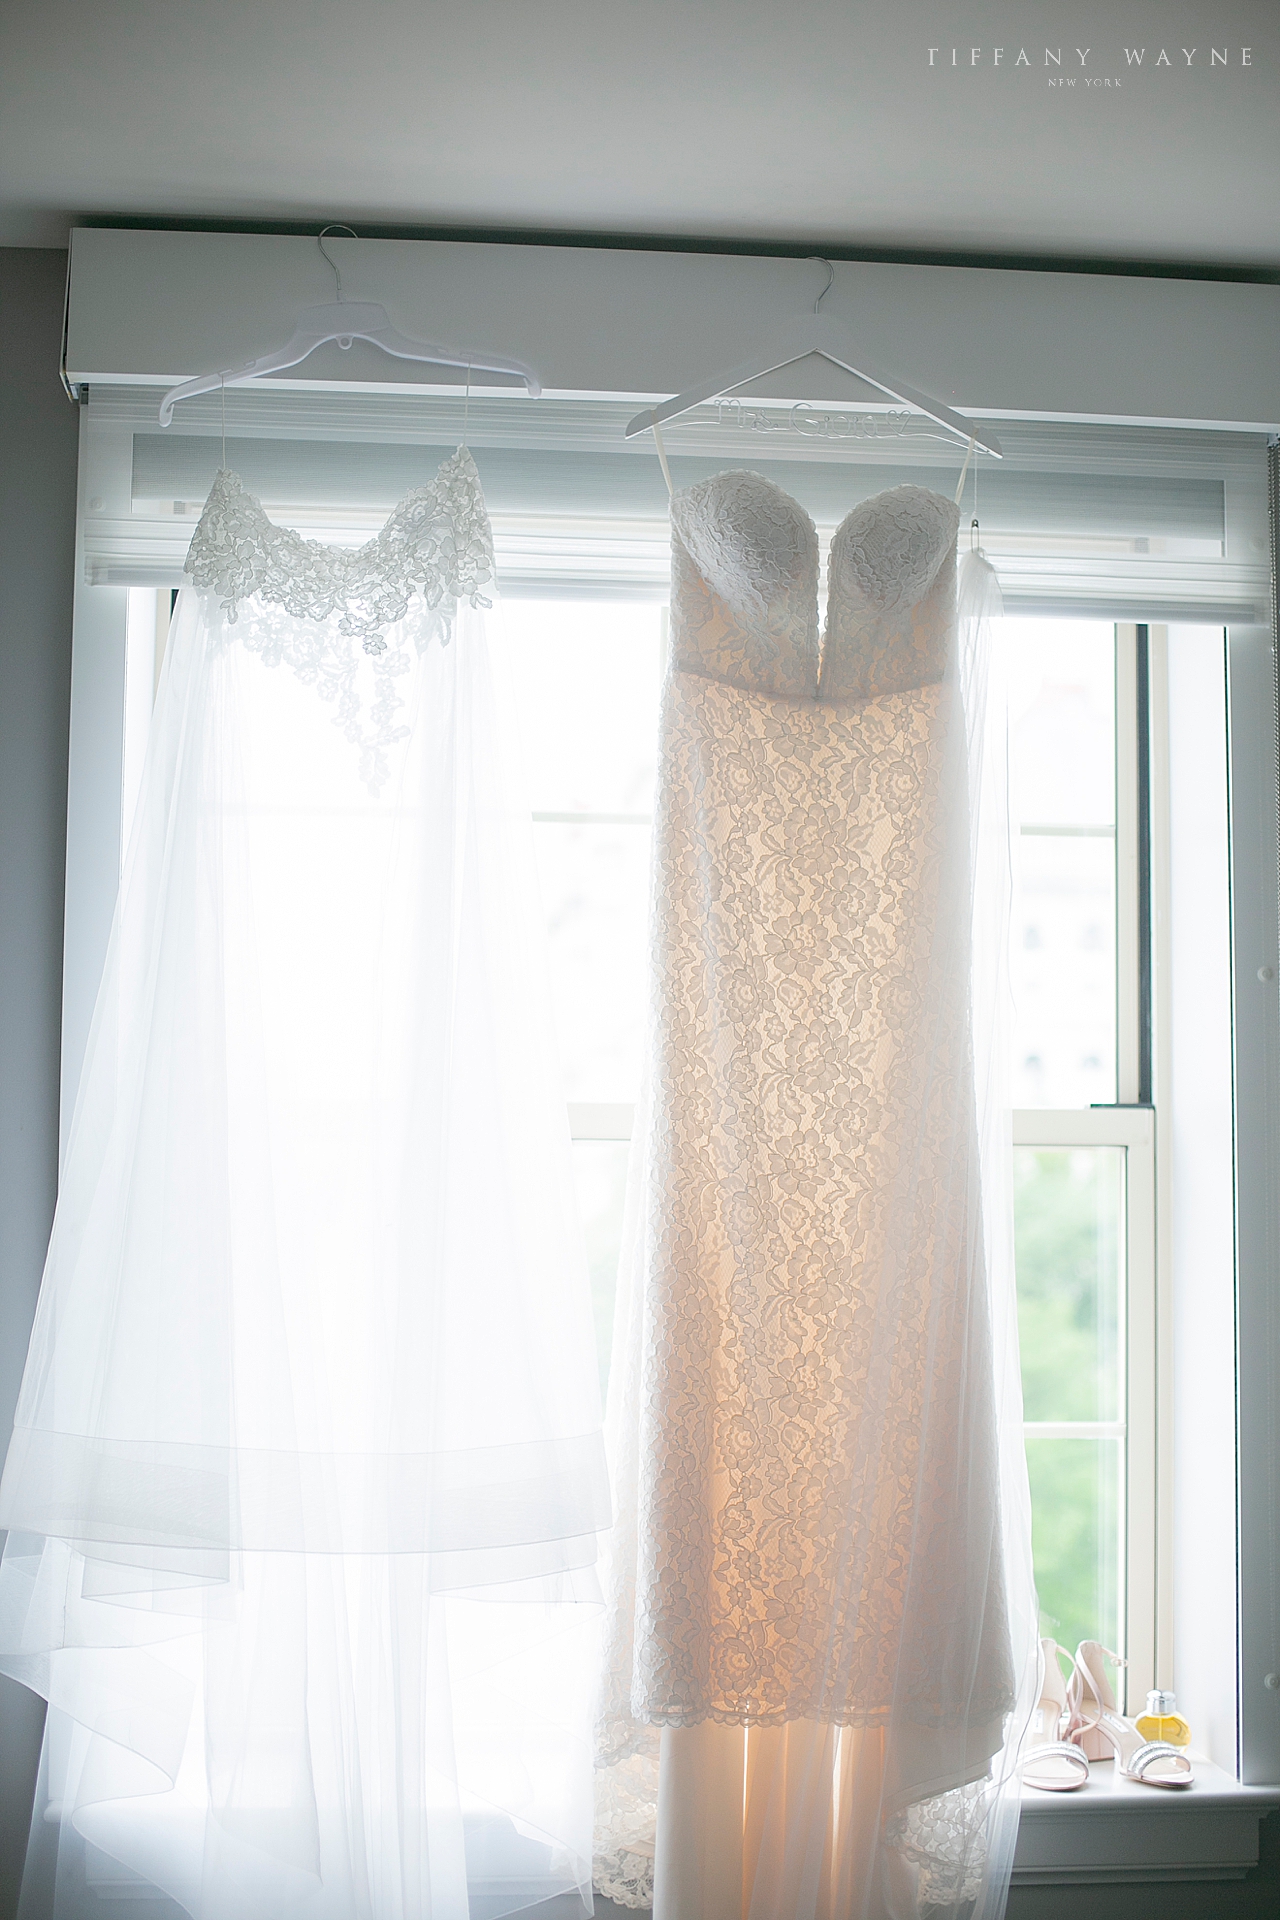 Two piece wedding gown from Angela's Bridal photographed by New York wedding photographer Tiffany Wayne